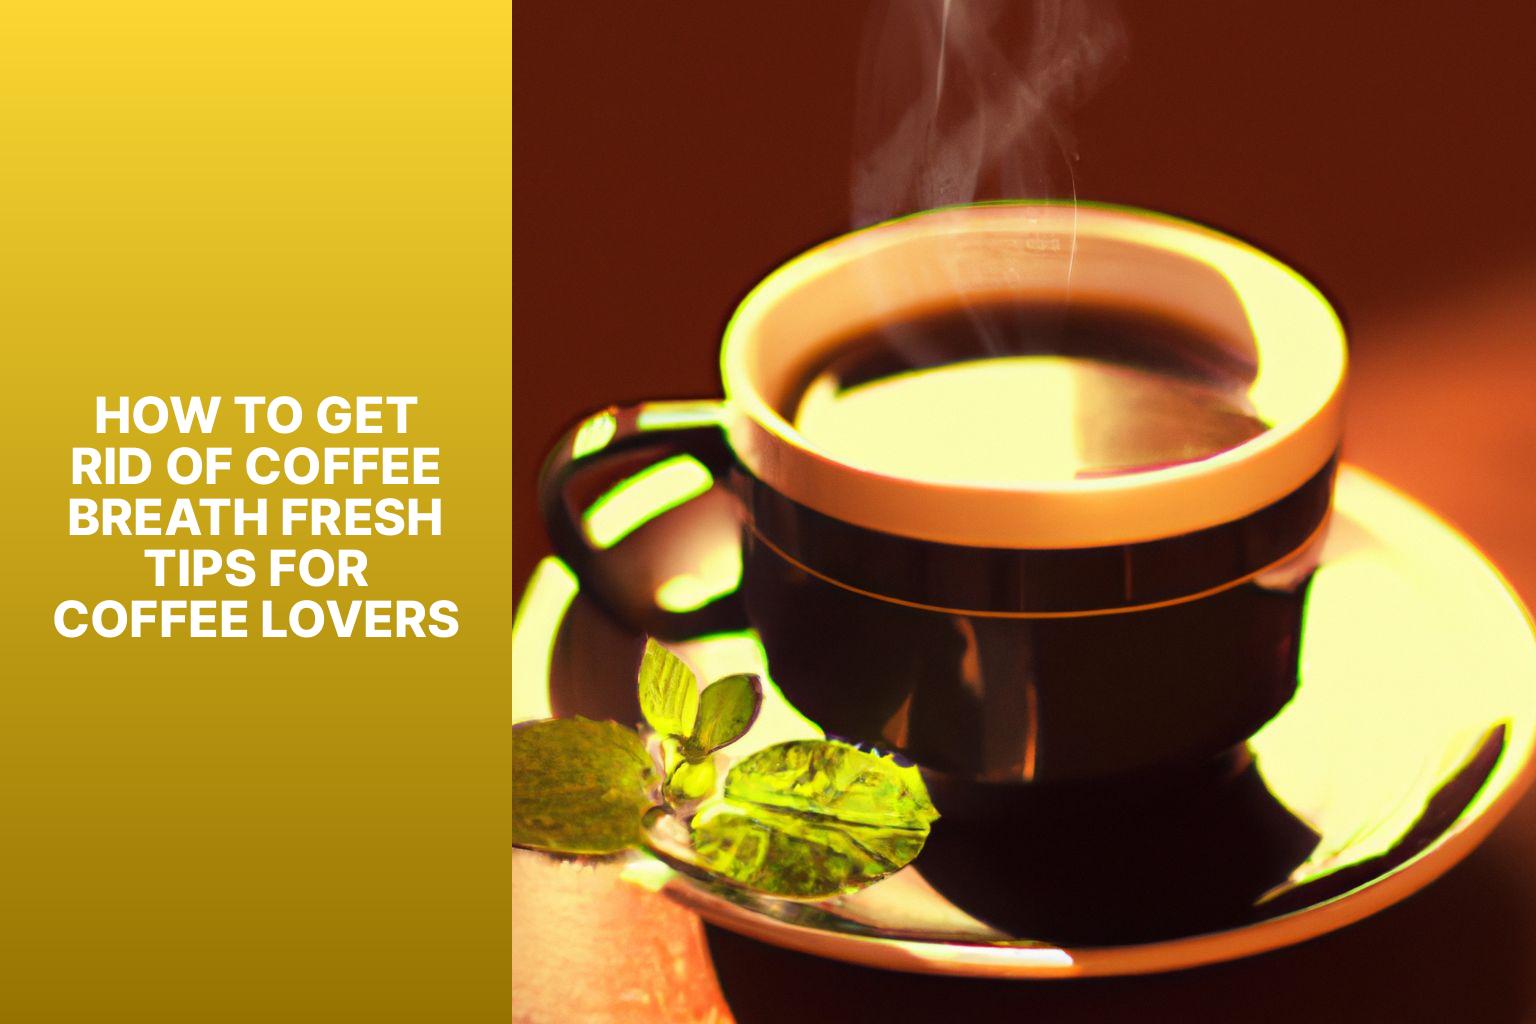 How to Get Rid of Coffee Breath: Fresh Tips for Coffee Lovers